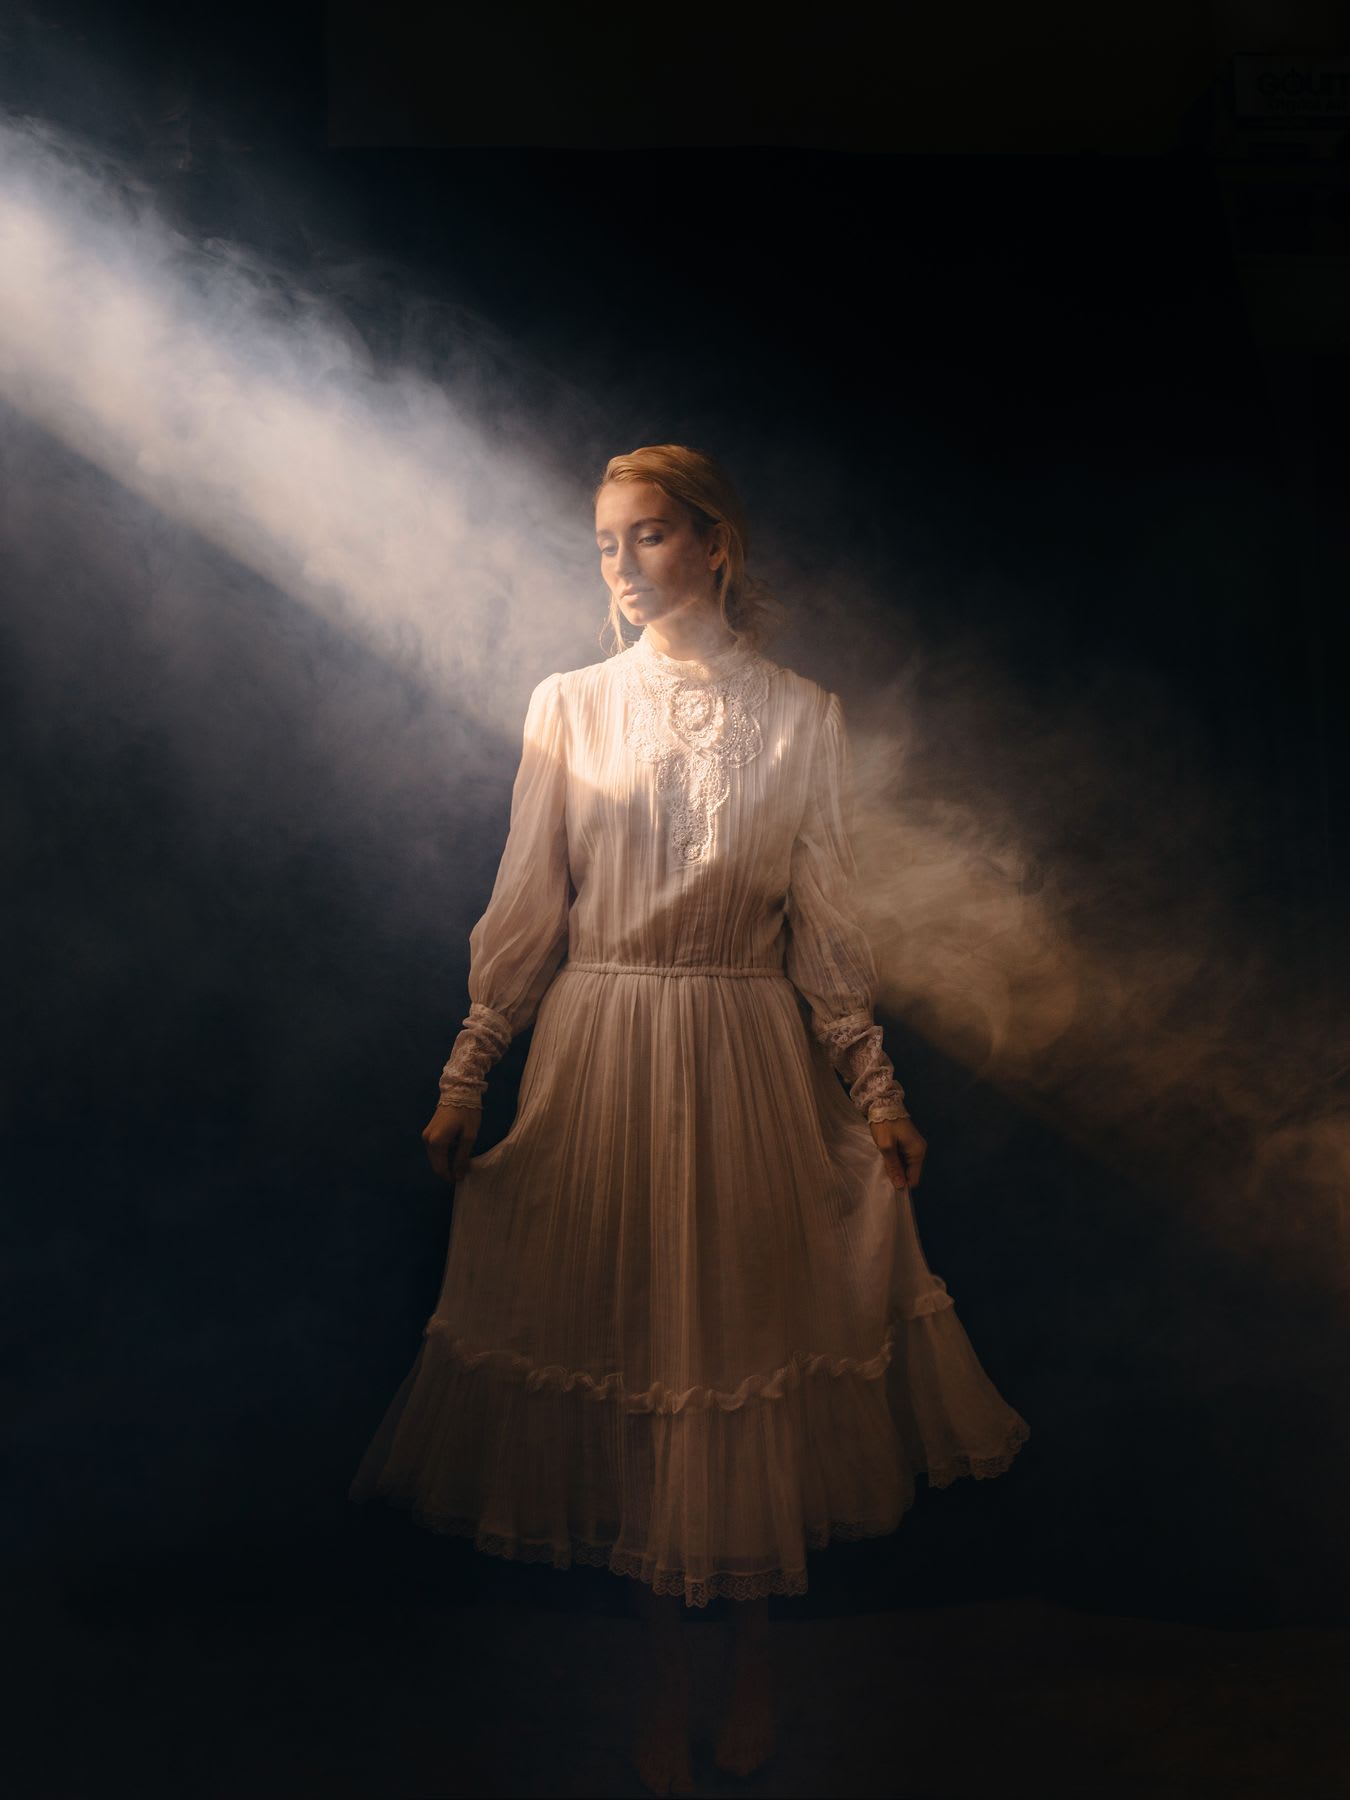 Woman in a vintage lace dress standing in a beam of light with a hazy smoke effect around her.